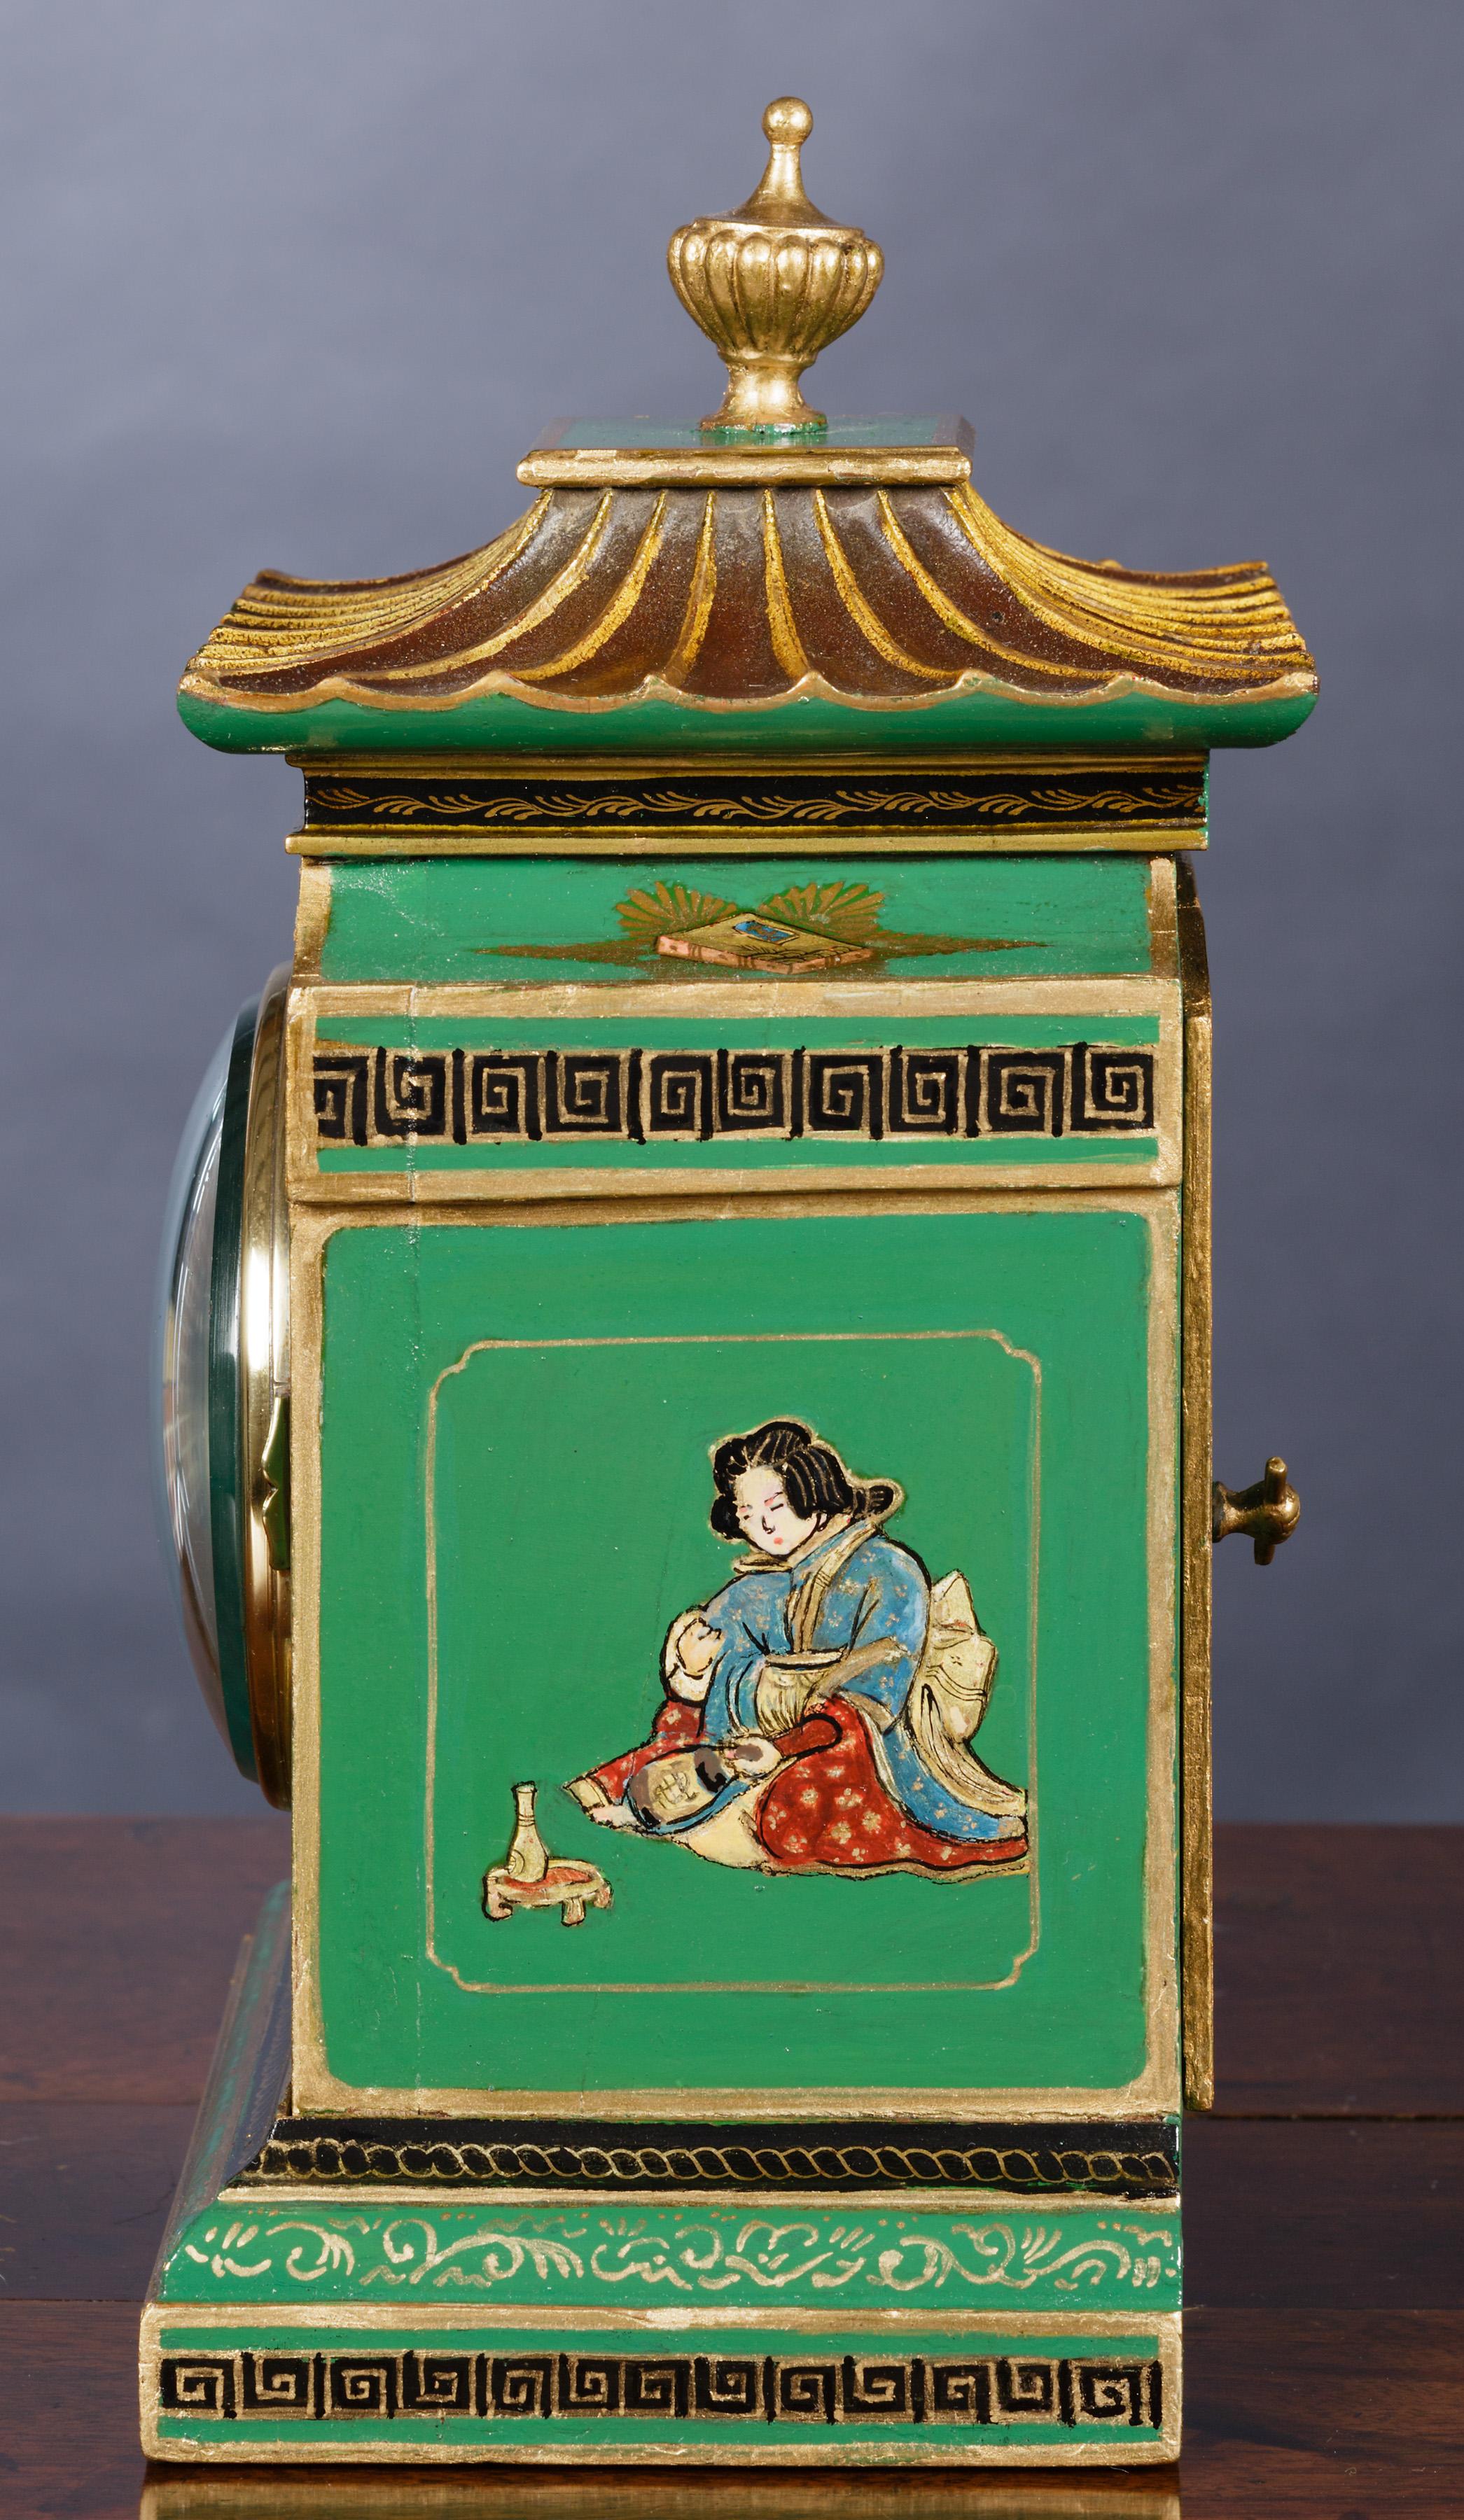 Mappin & Webb

Edwardian mantel clock housed in a chinoiserie decorated case on a green ground with typical Chinese scenes standing on a raised, stepped base and surmounted by a pagoda top with vase finial.

Eight day movement with lever